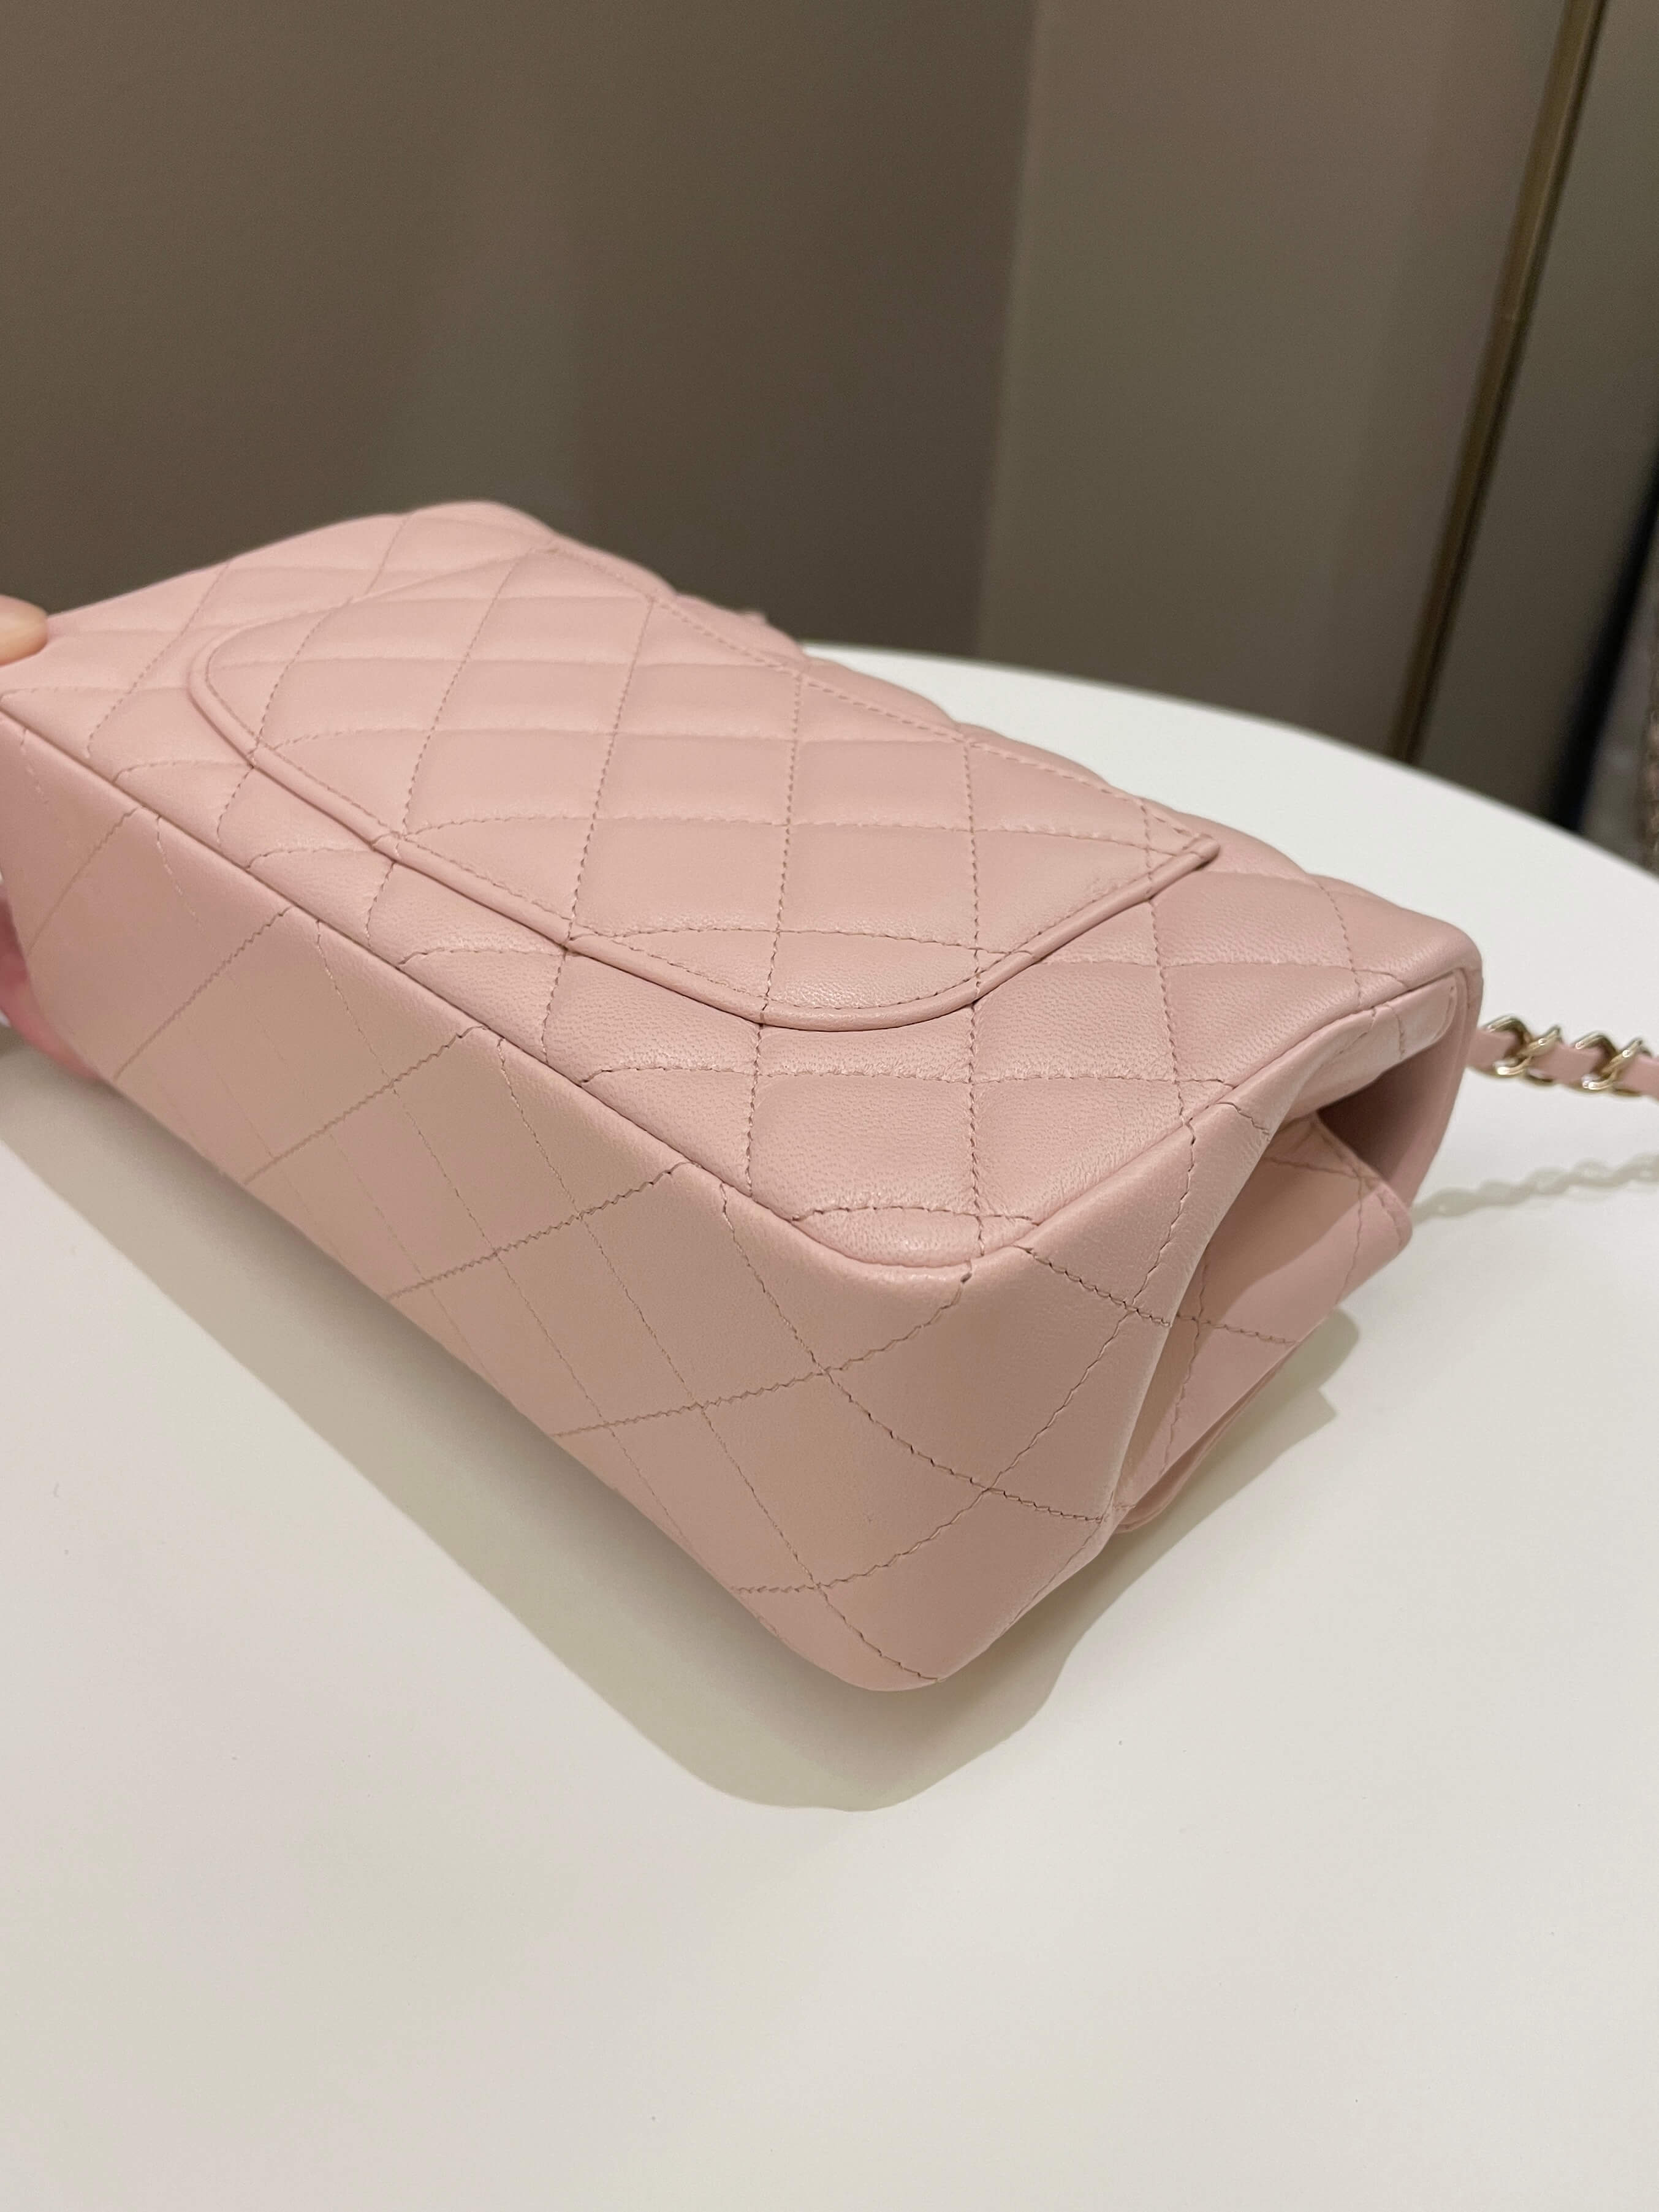 Chanel Classic Quilted Mini Rectangular Pale Pink Lambskin